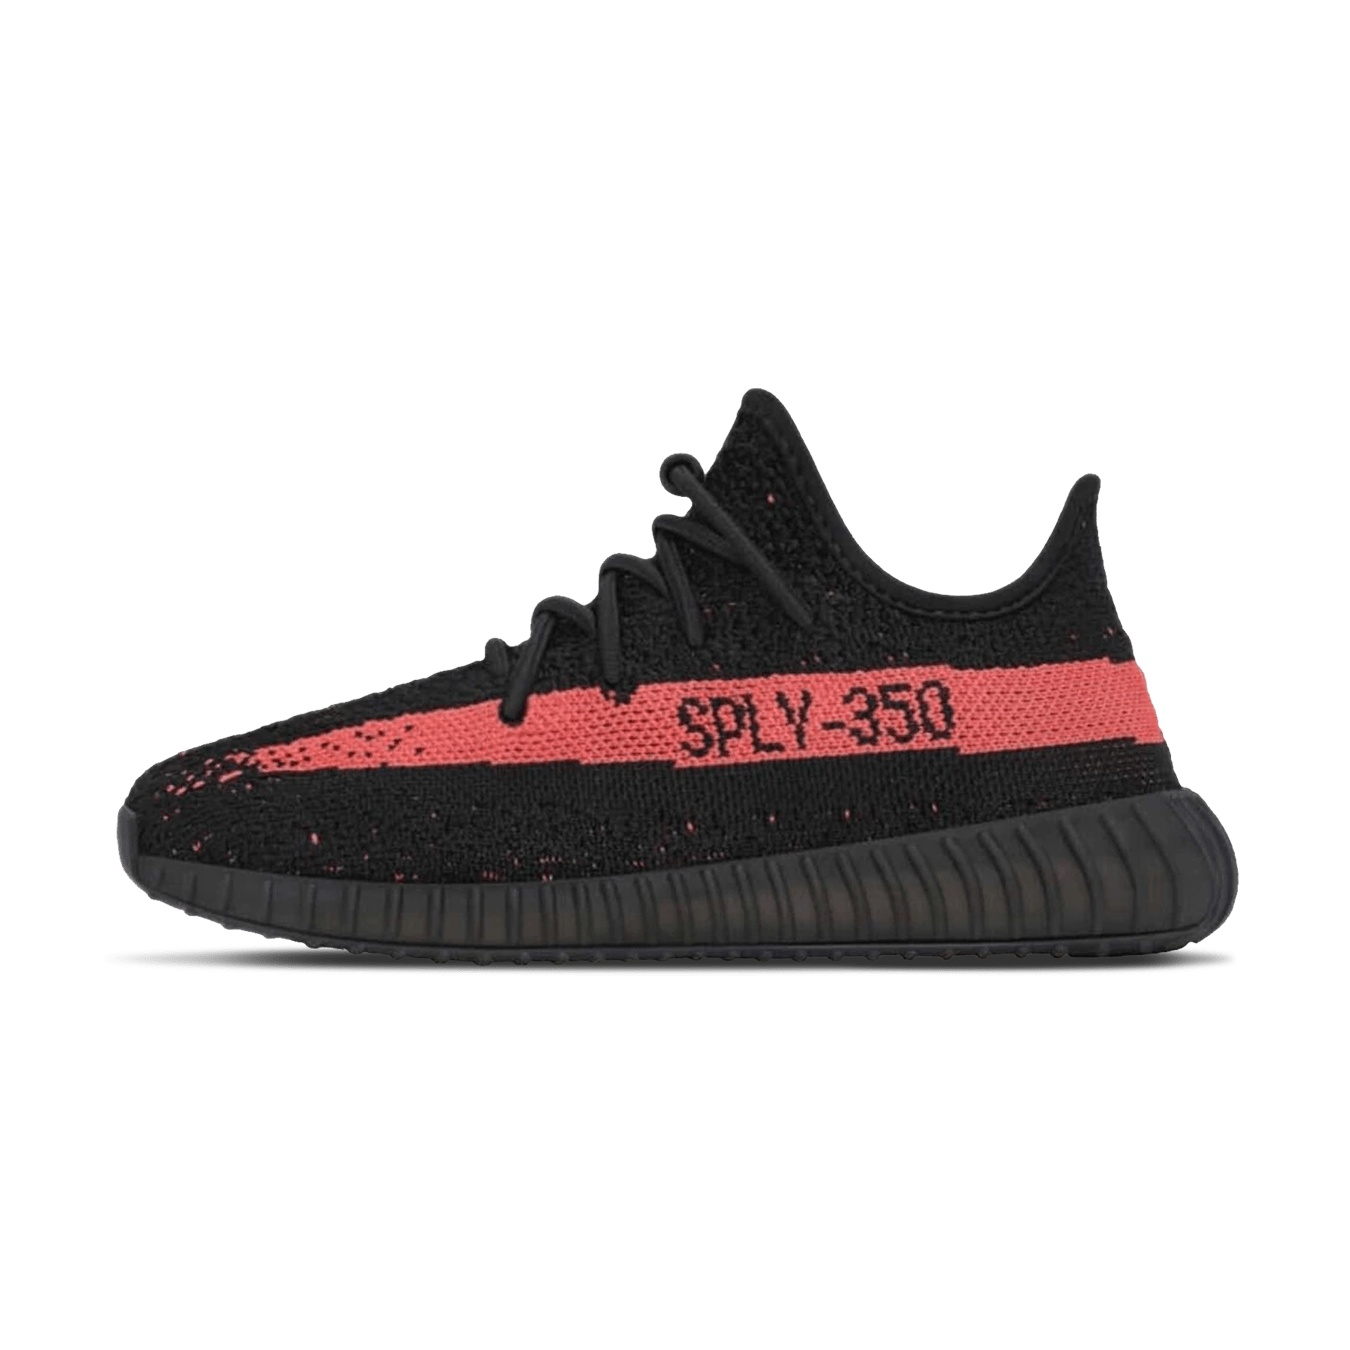 Parpadeo constructor embargo adidas Yeezy Boost 350 V2 Kids Core Black Red — Kick Game